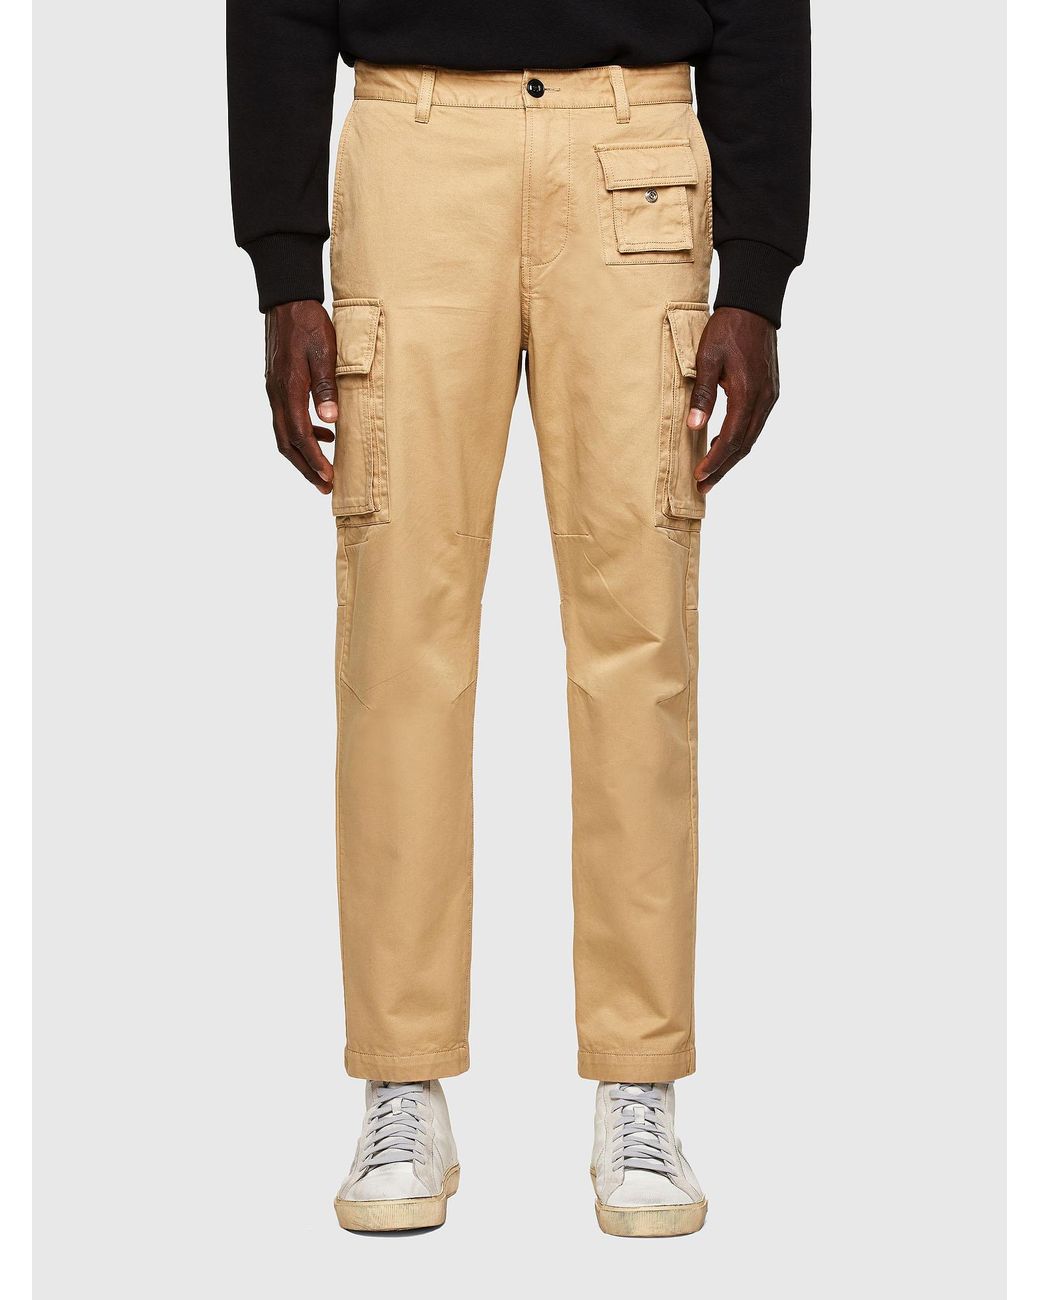 DIESEL P-cor Cargo Pants In Cotton Twill in Brown for Men - Lyst